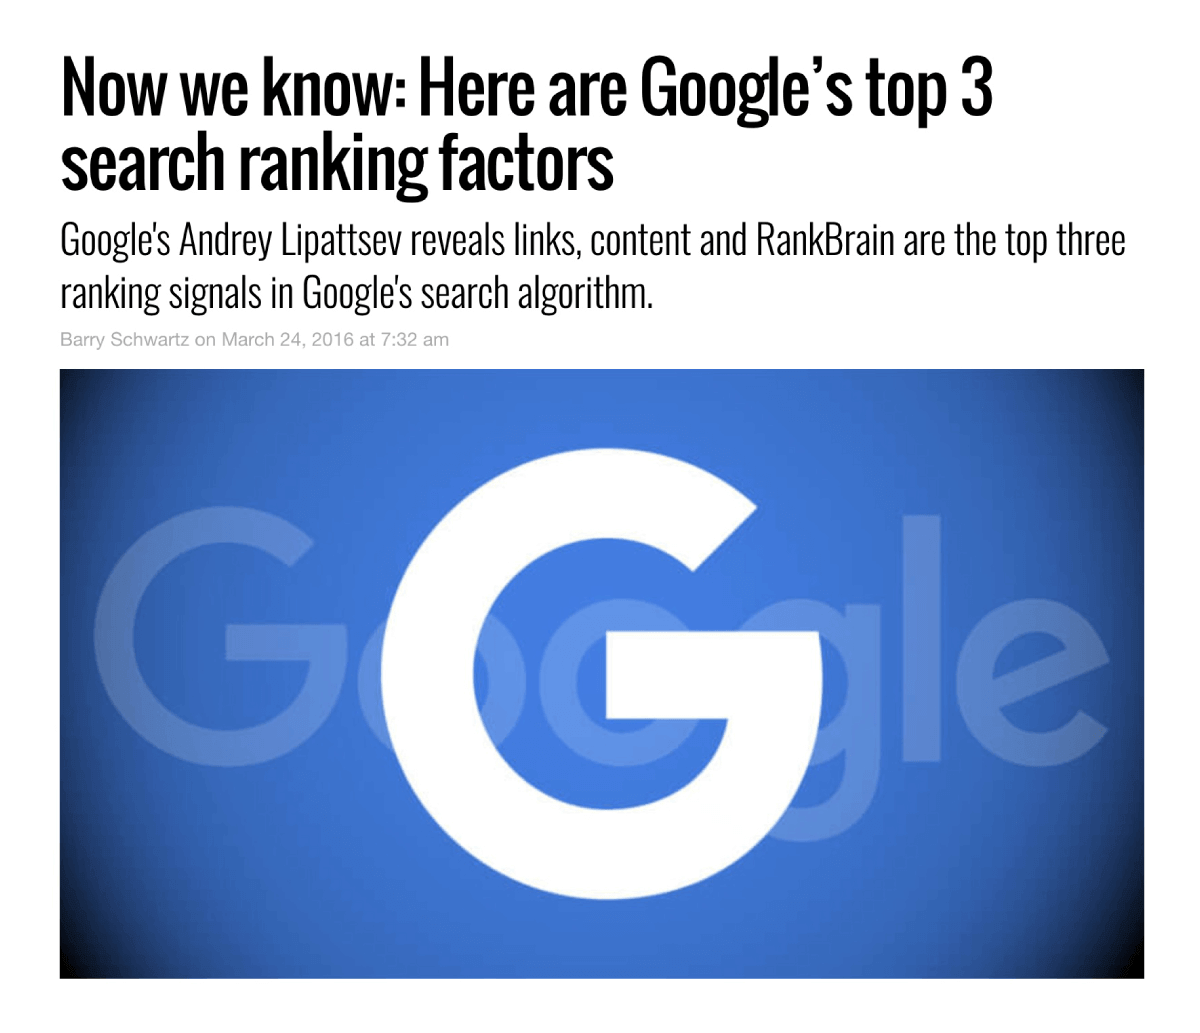 Search ranking factors